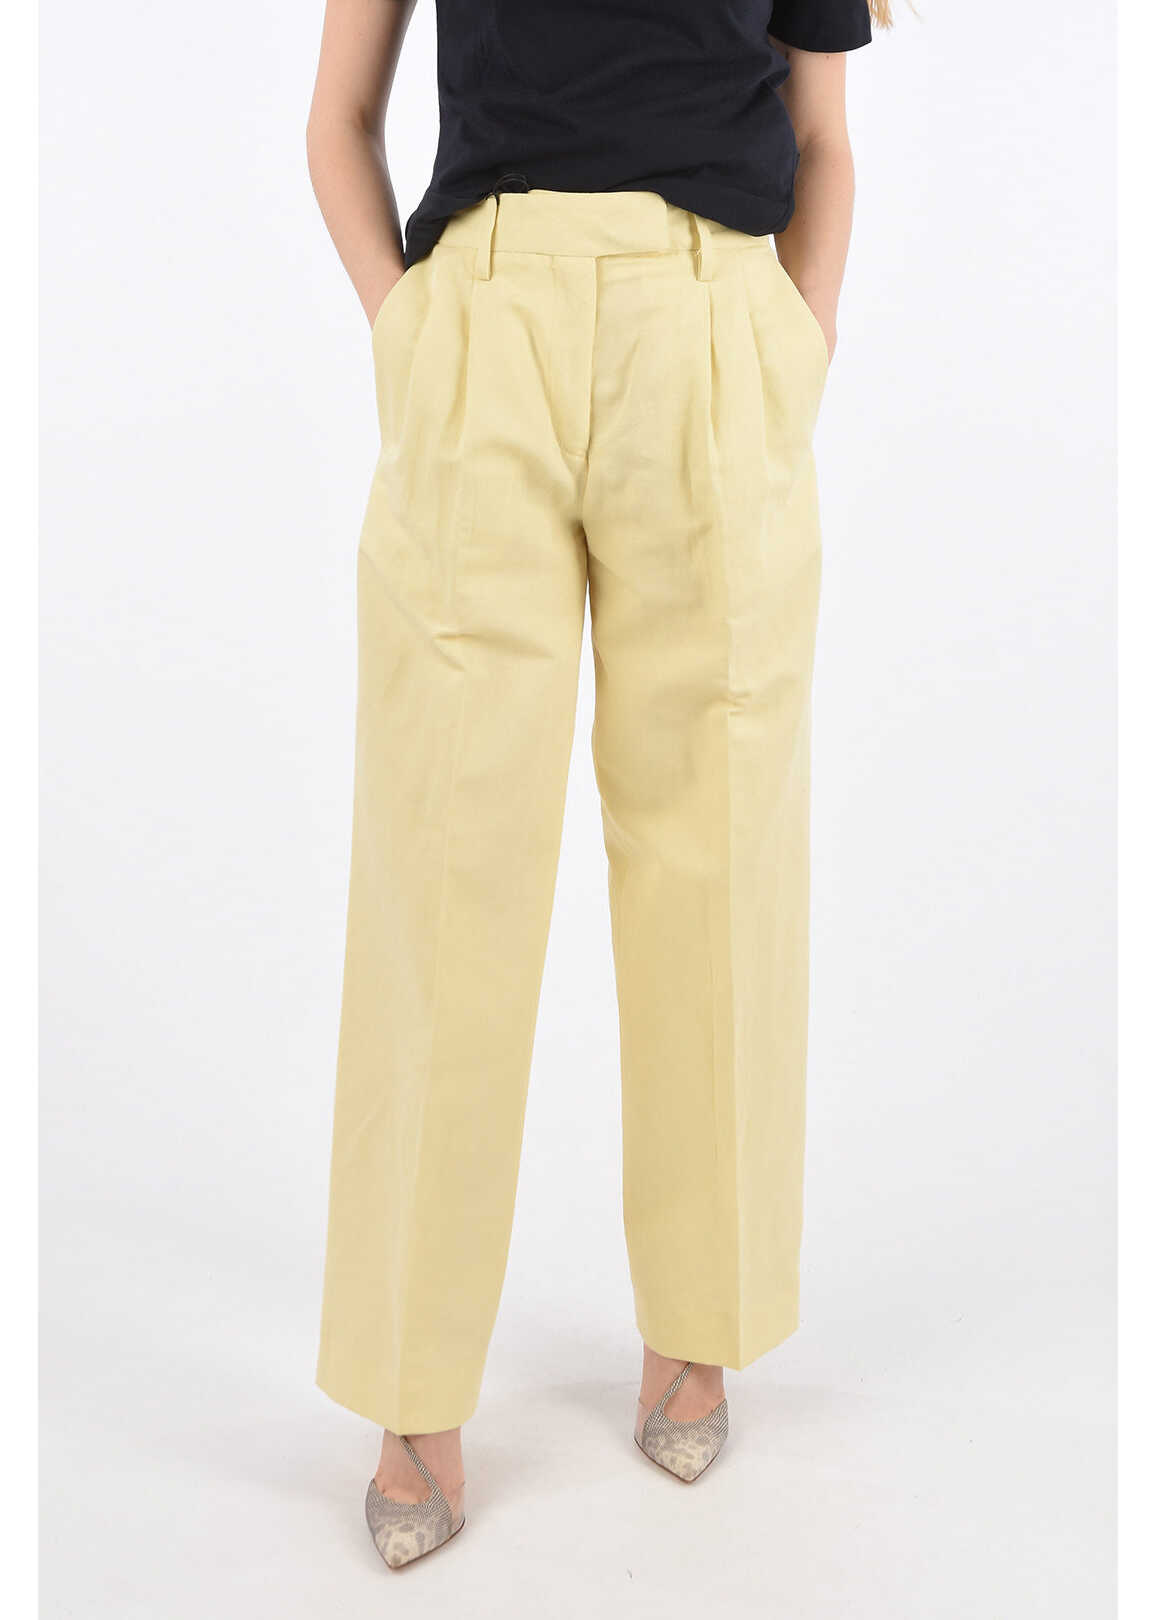 REMAIN High Waist Linen And Cotton Camino Double Pleated Pants Yellow